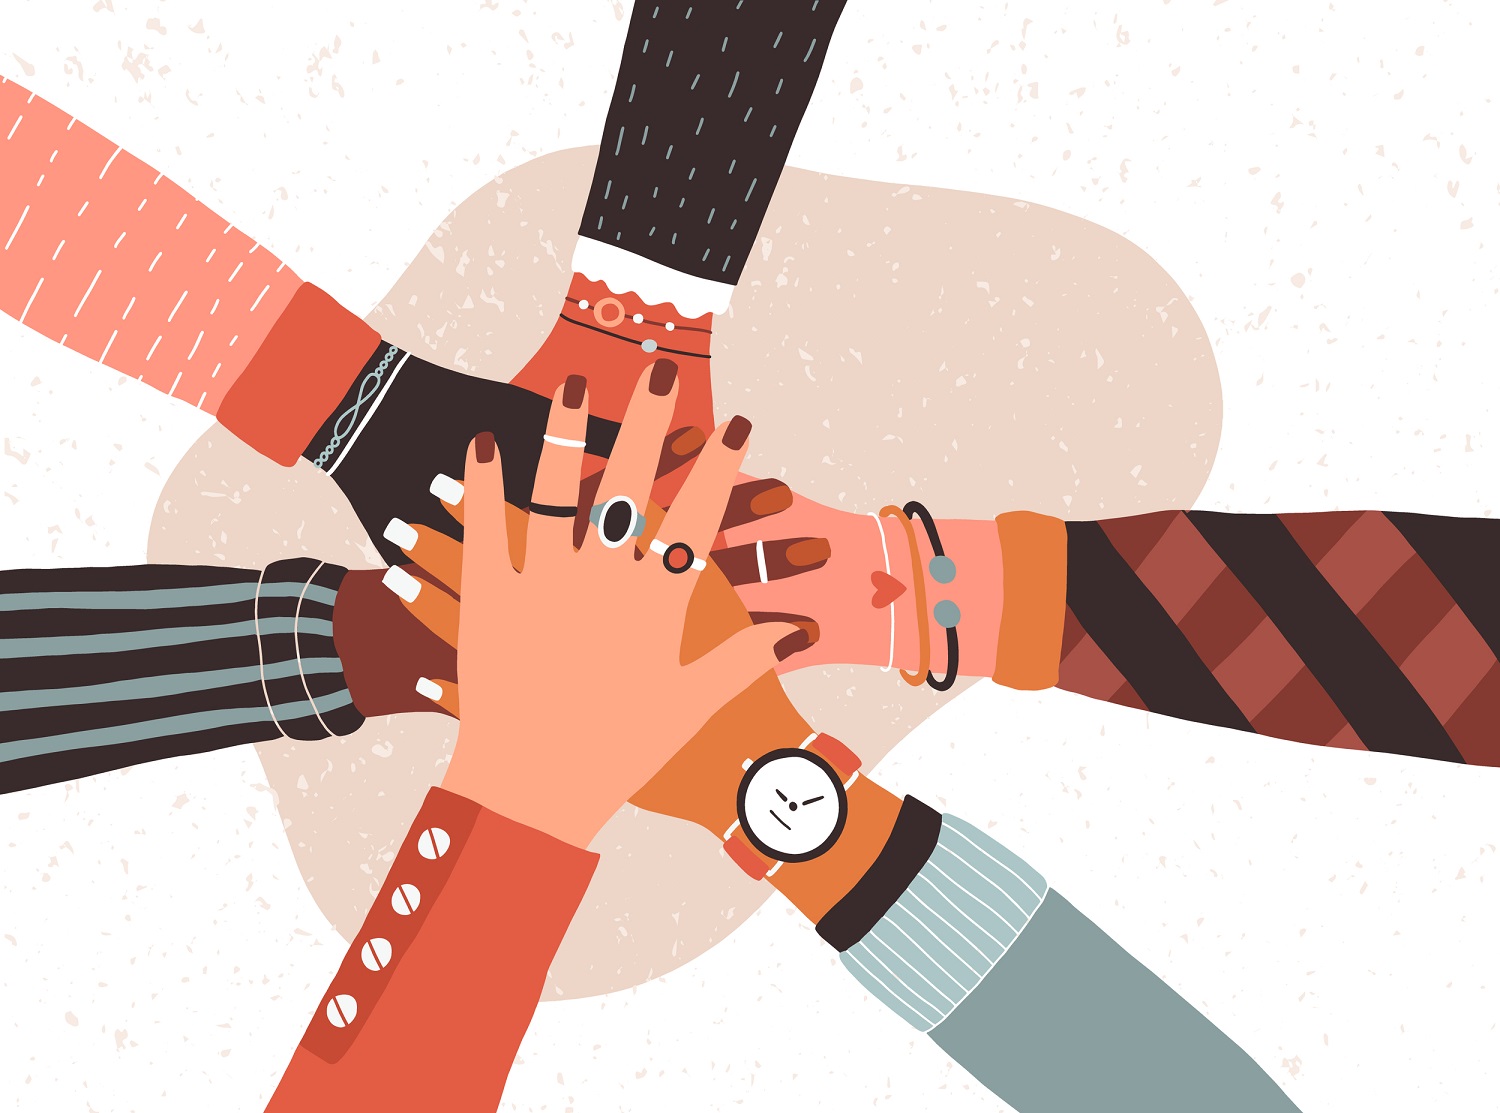 An illustration of a group of connected hands symbolizing support.